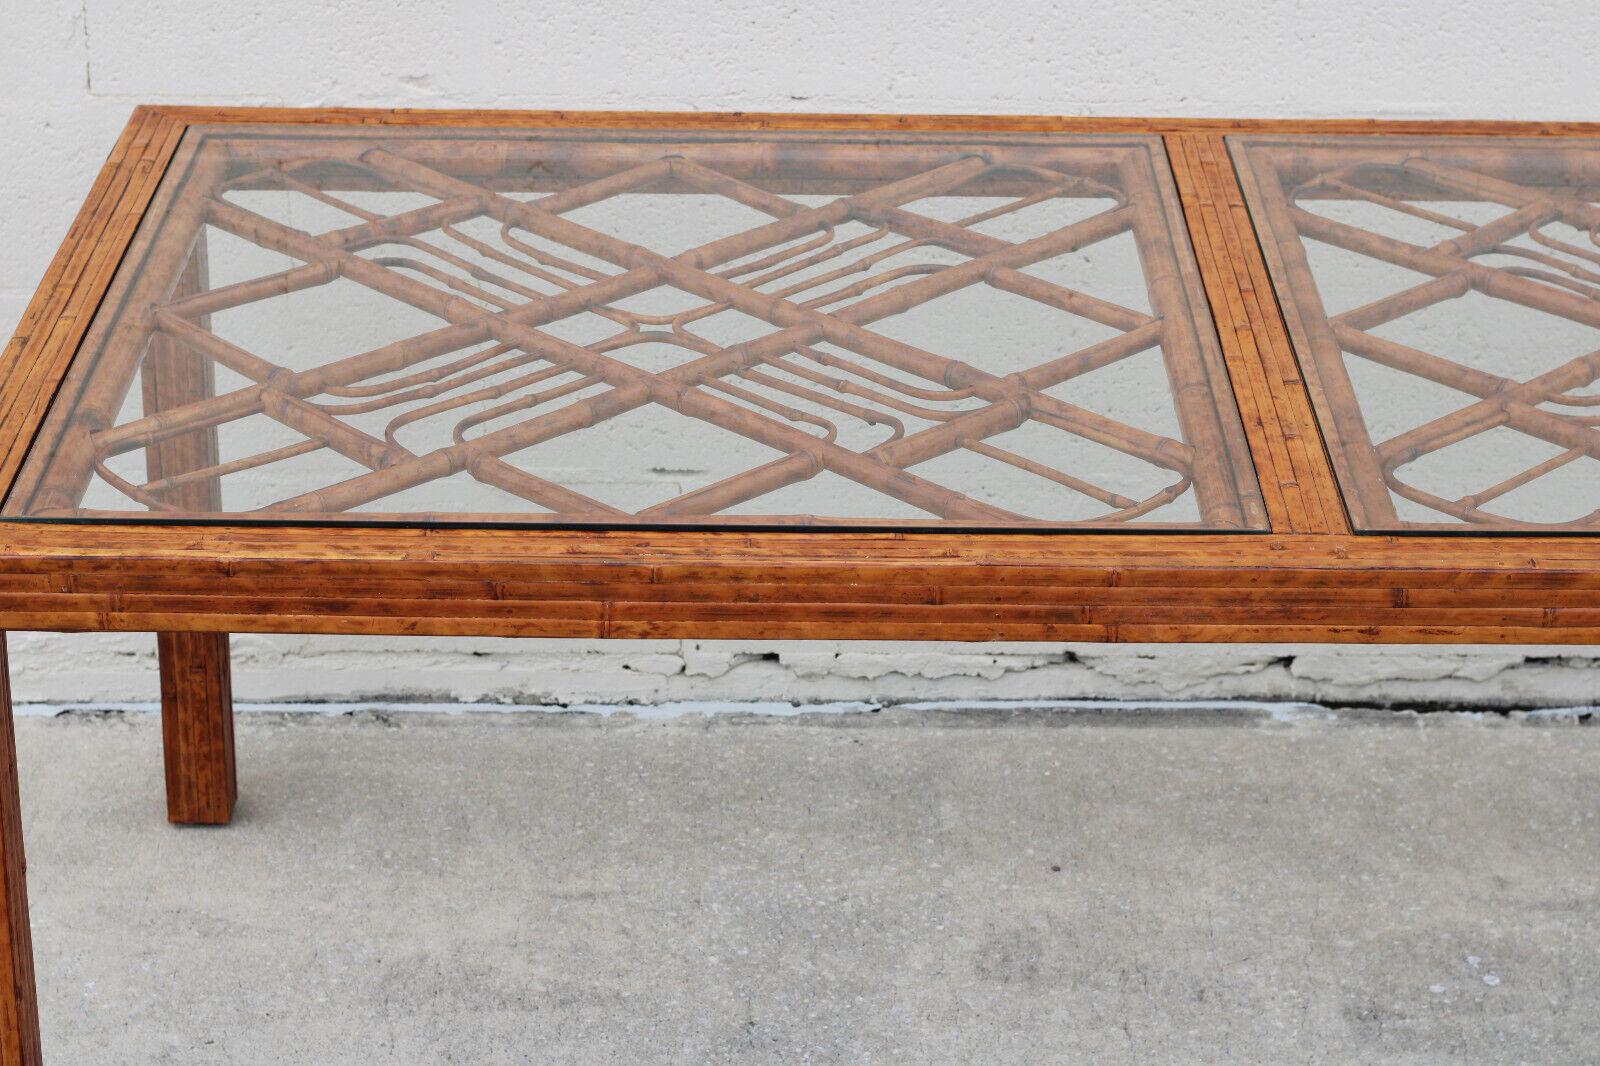 Gorgeous Brighton Pavilion style tortoiseshell burnt bamboo rattan dining table, circa 1970s. Expertly crafted and beautifully finished with burning techniques, this rectangular 78